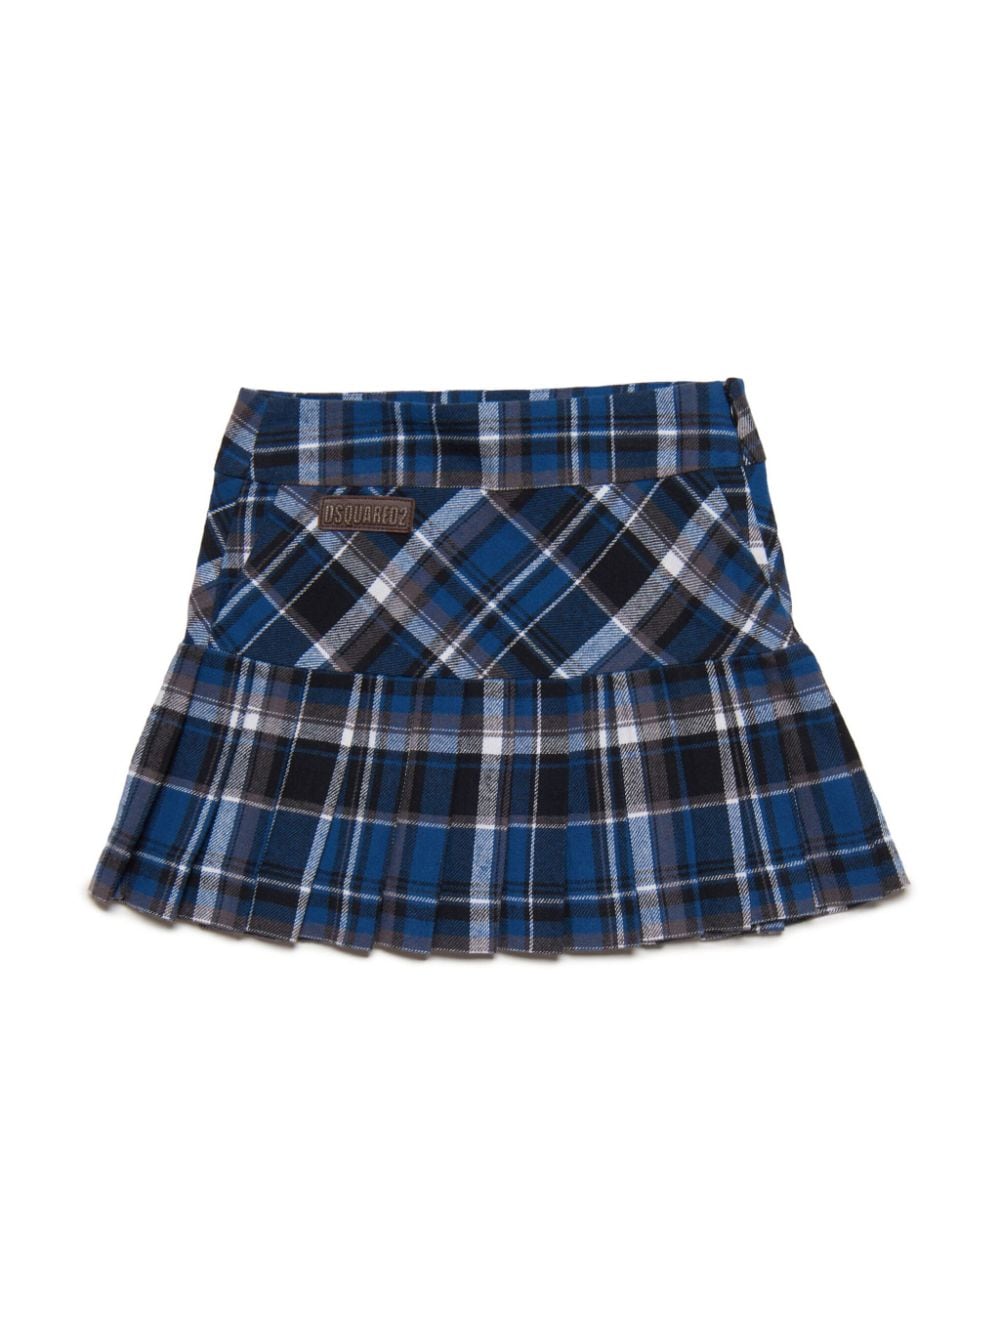 DSQUARED2 KIDS checked pleated skirt - Blue von DSQUARED2 KIDS